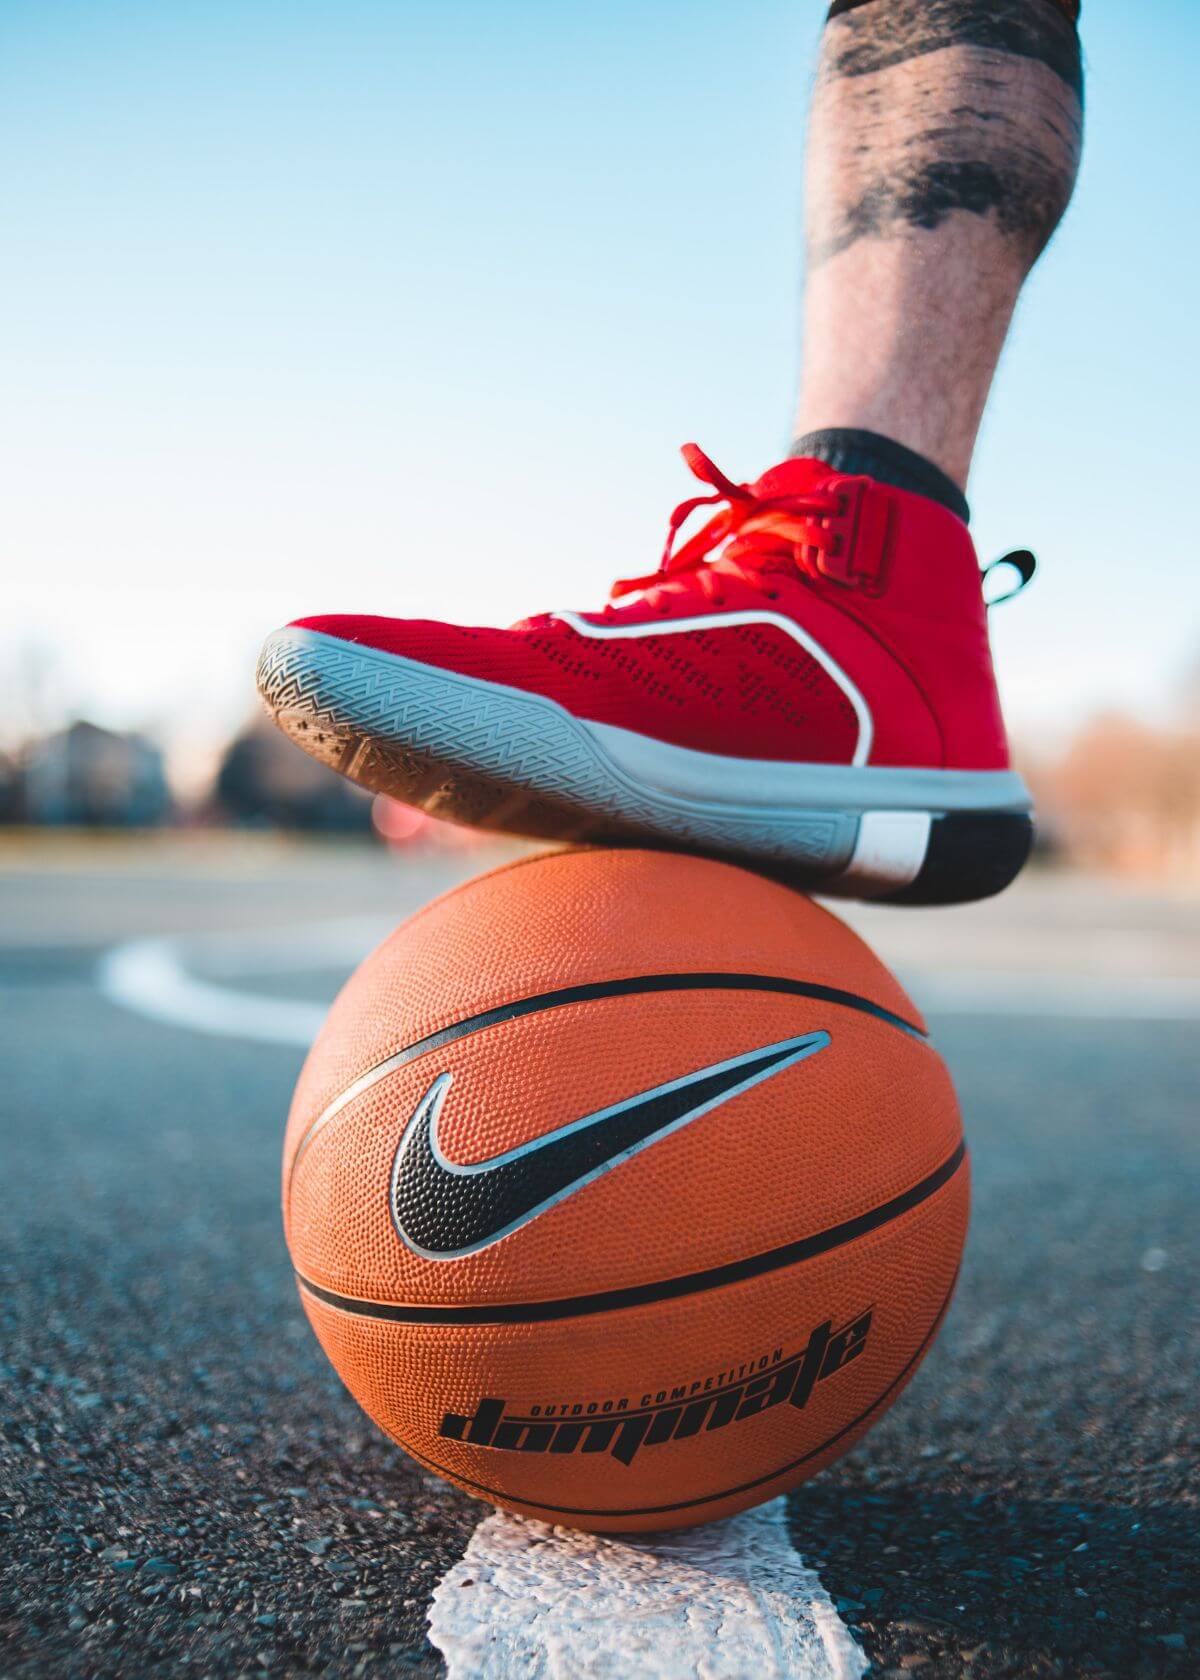 RANKED! The 5 Best Low Top Basketball Shoes